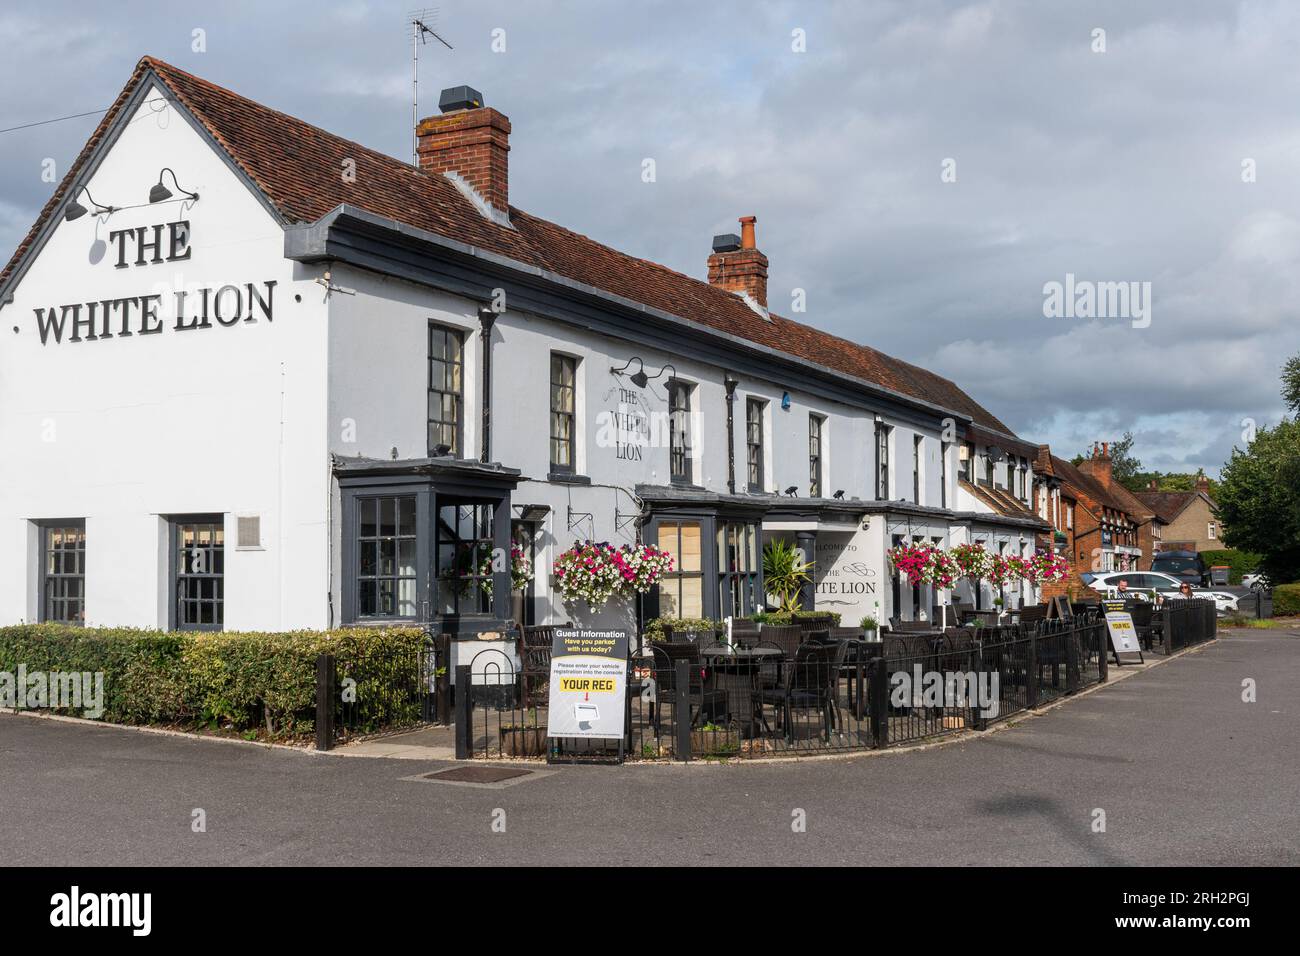 The White Lion Inn or pub in Yateley, Hampshire, England, UK, a historic grade II listed building Stock Photo